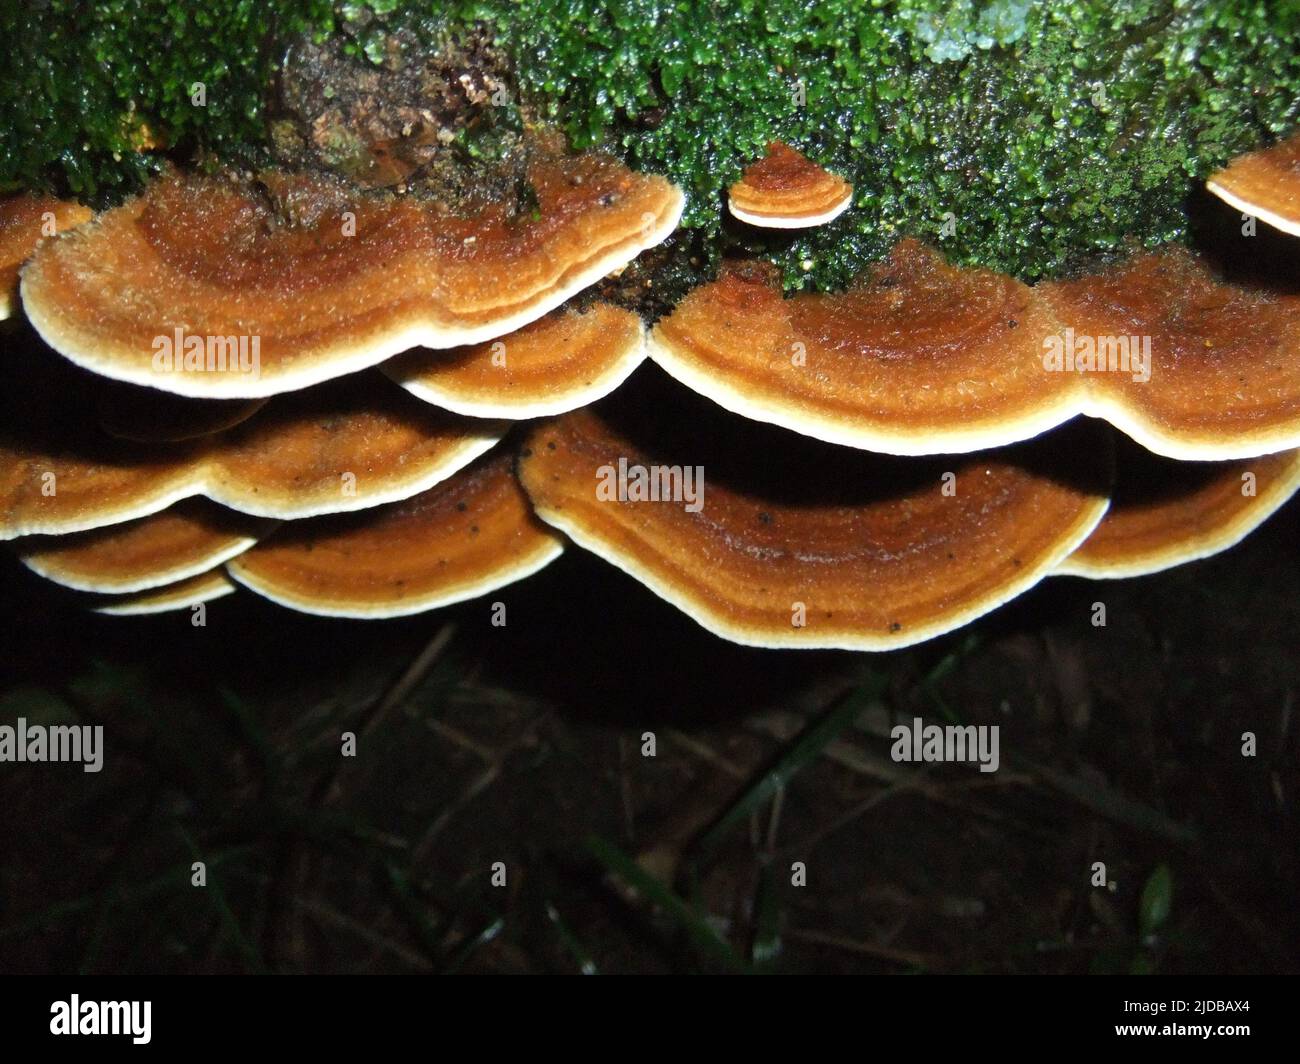 multiple orange and yellow Polypore bracket fungi with white edges isolated on a natural dark background and lichen Stock Photo